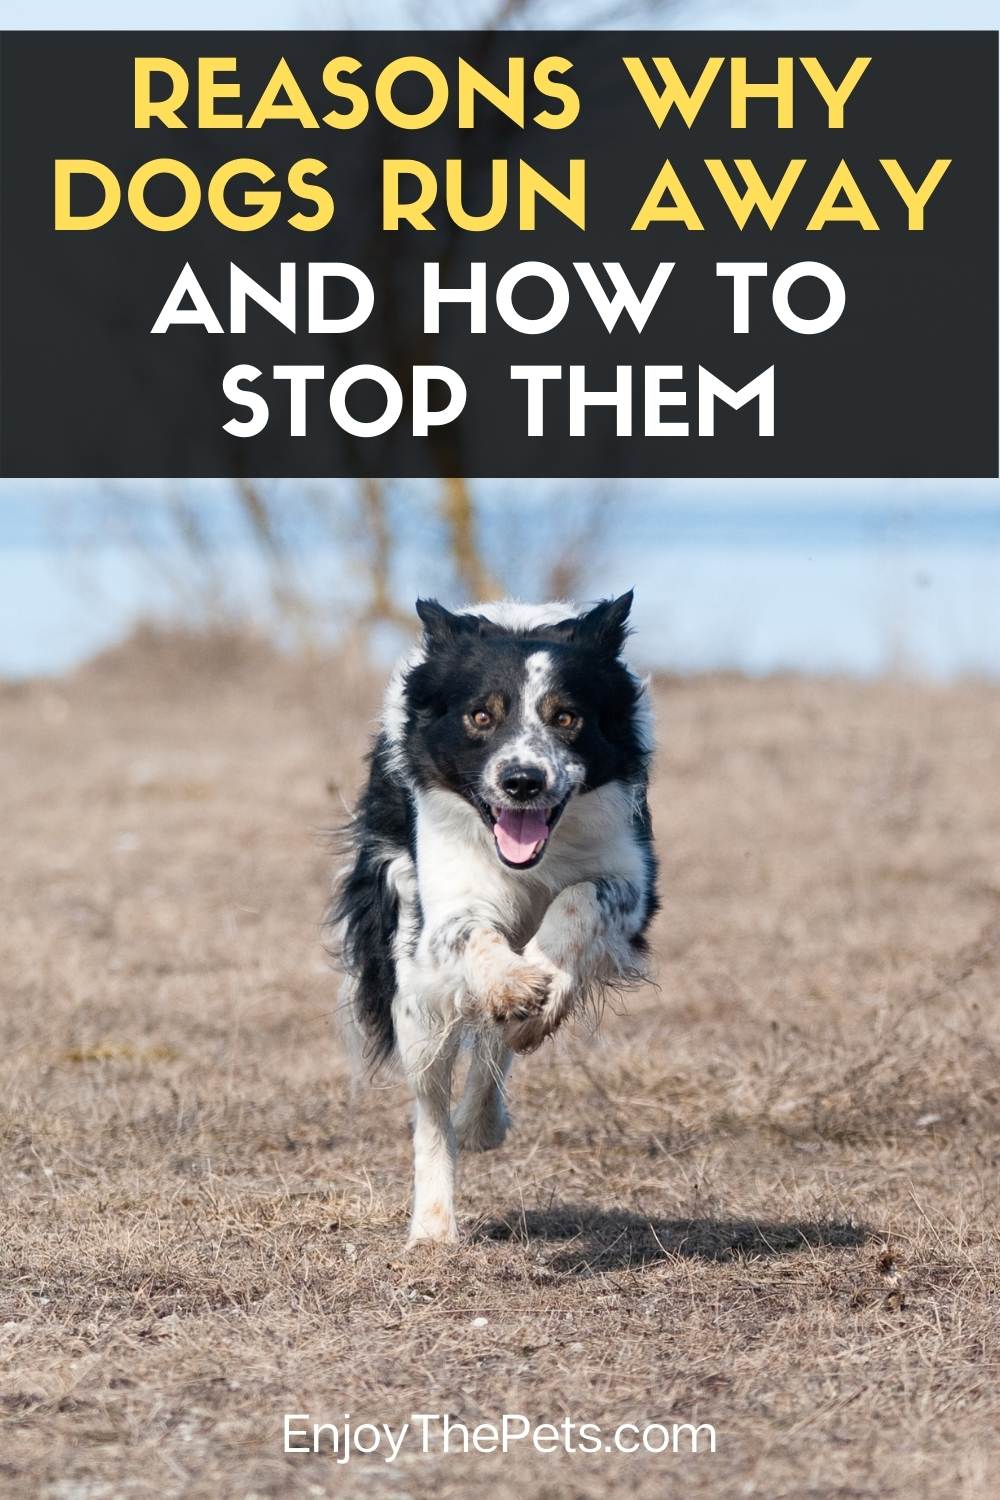 Reasons Why Dogs Run Away and How to Stop Them